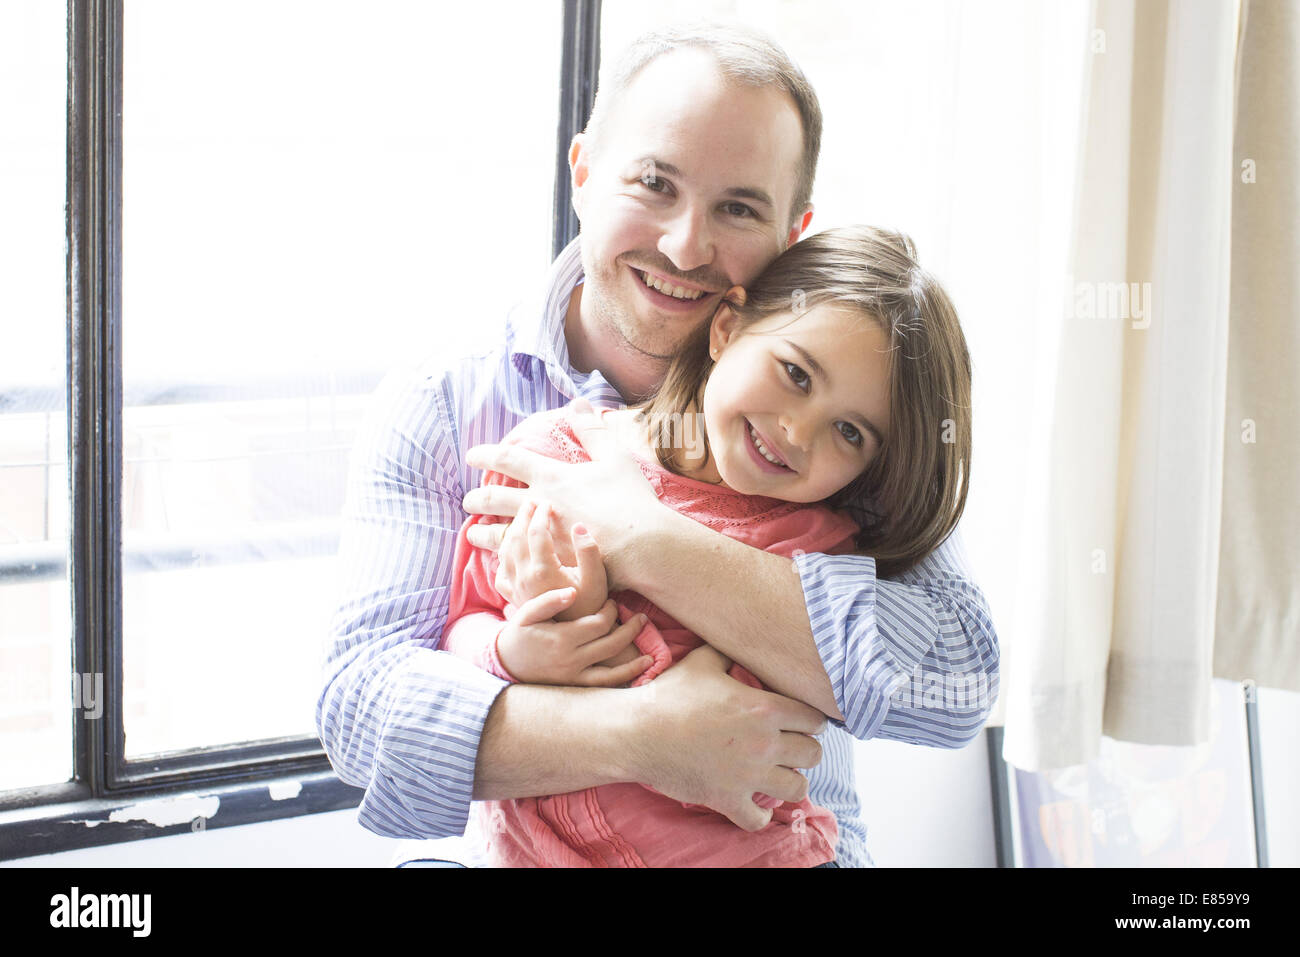 Father embracing young daughter, portrait Stock Photo